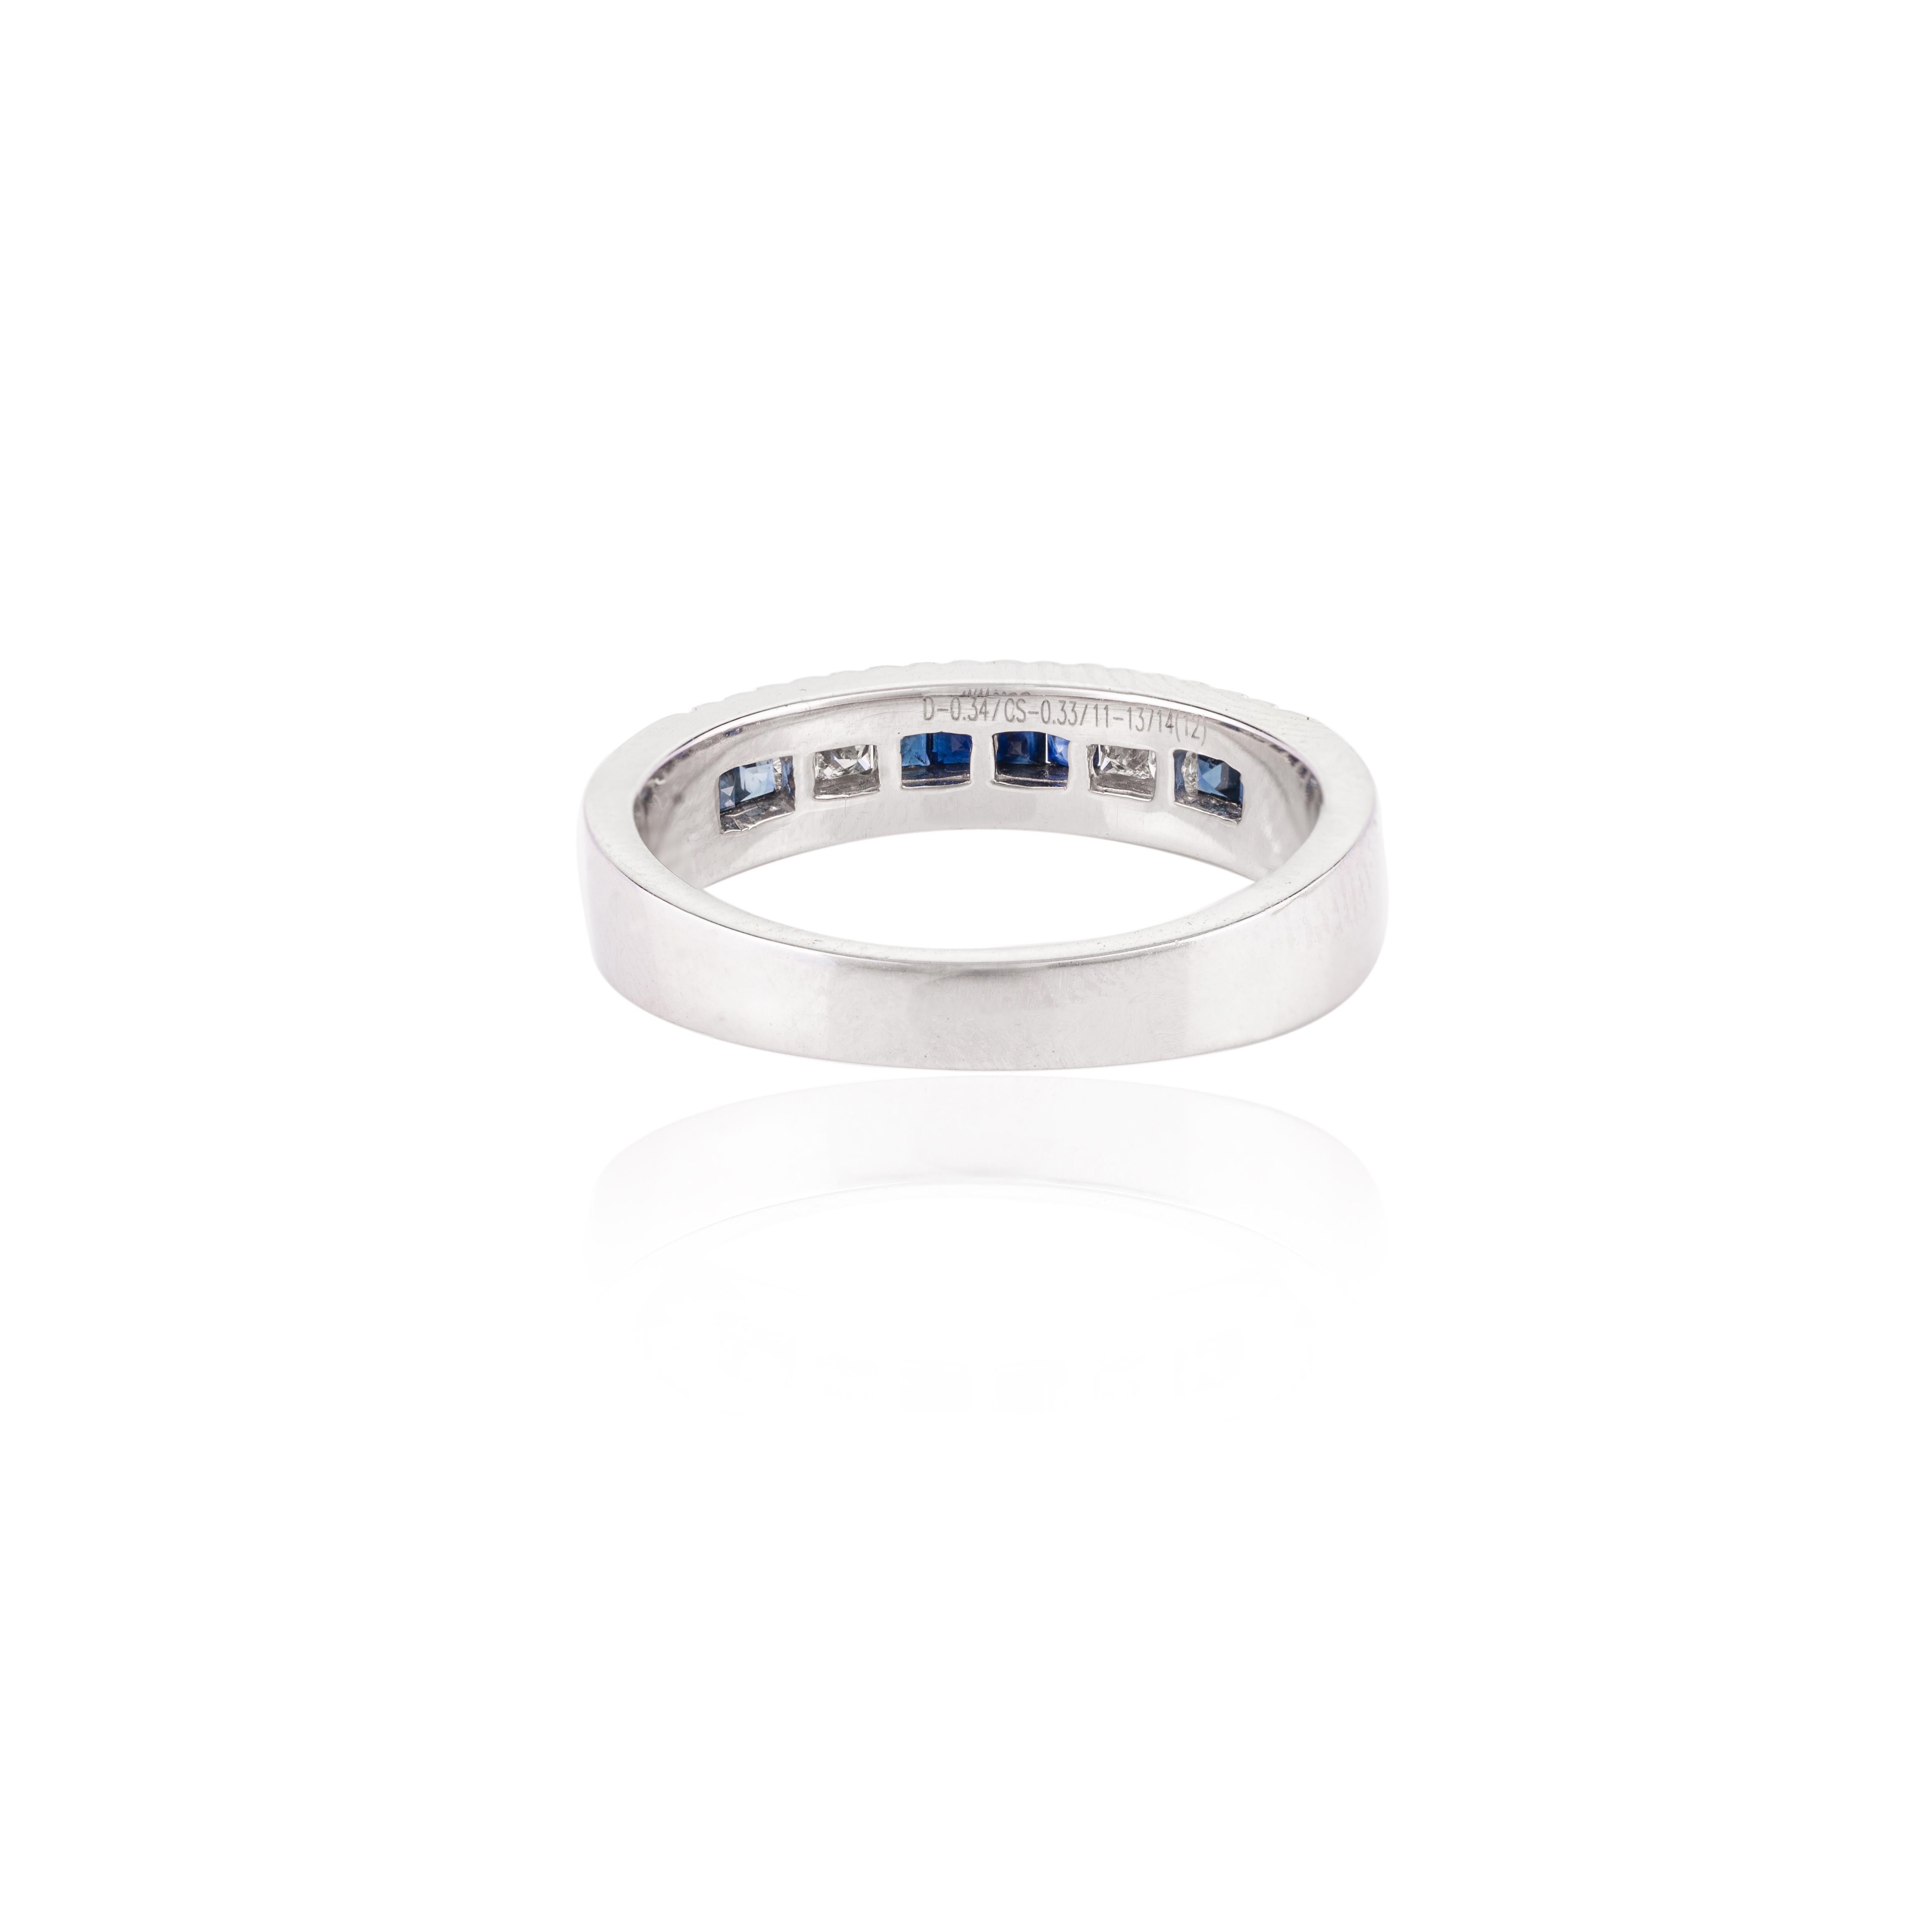 For Sale:  Stunning Blue Sapphire Diamond Engagement Band Ring for Her in 18k White Gold 7